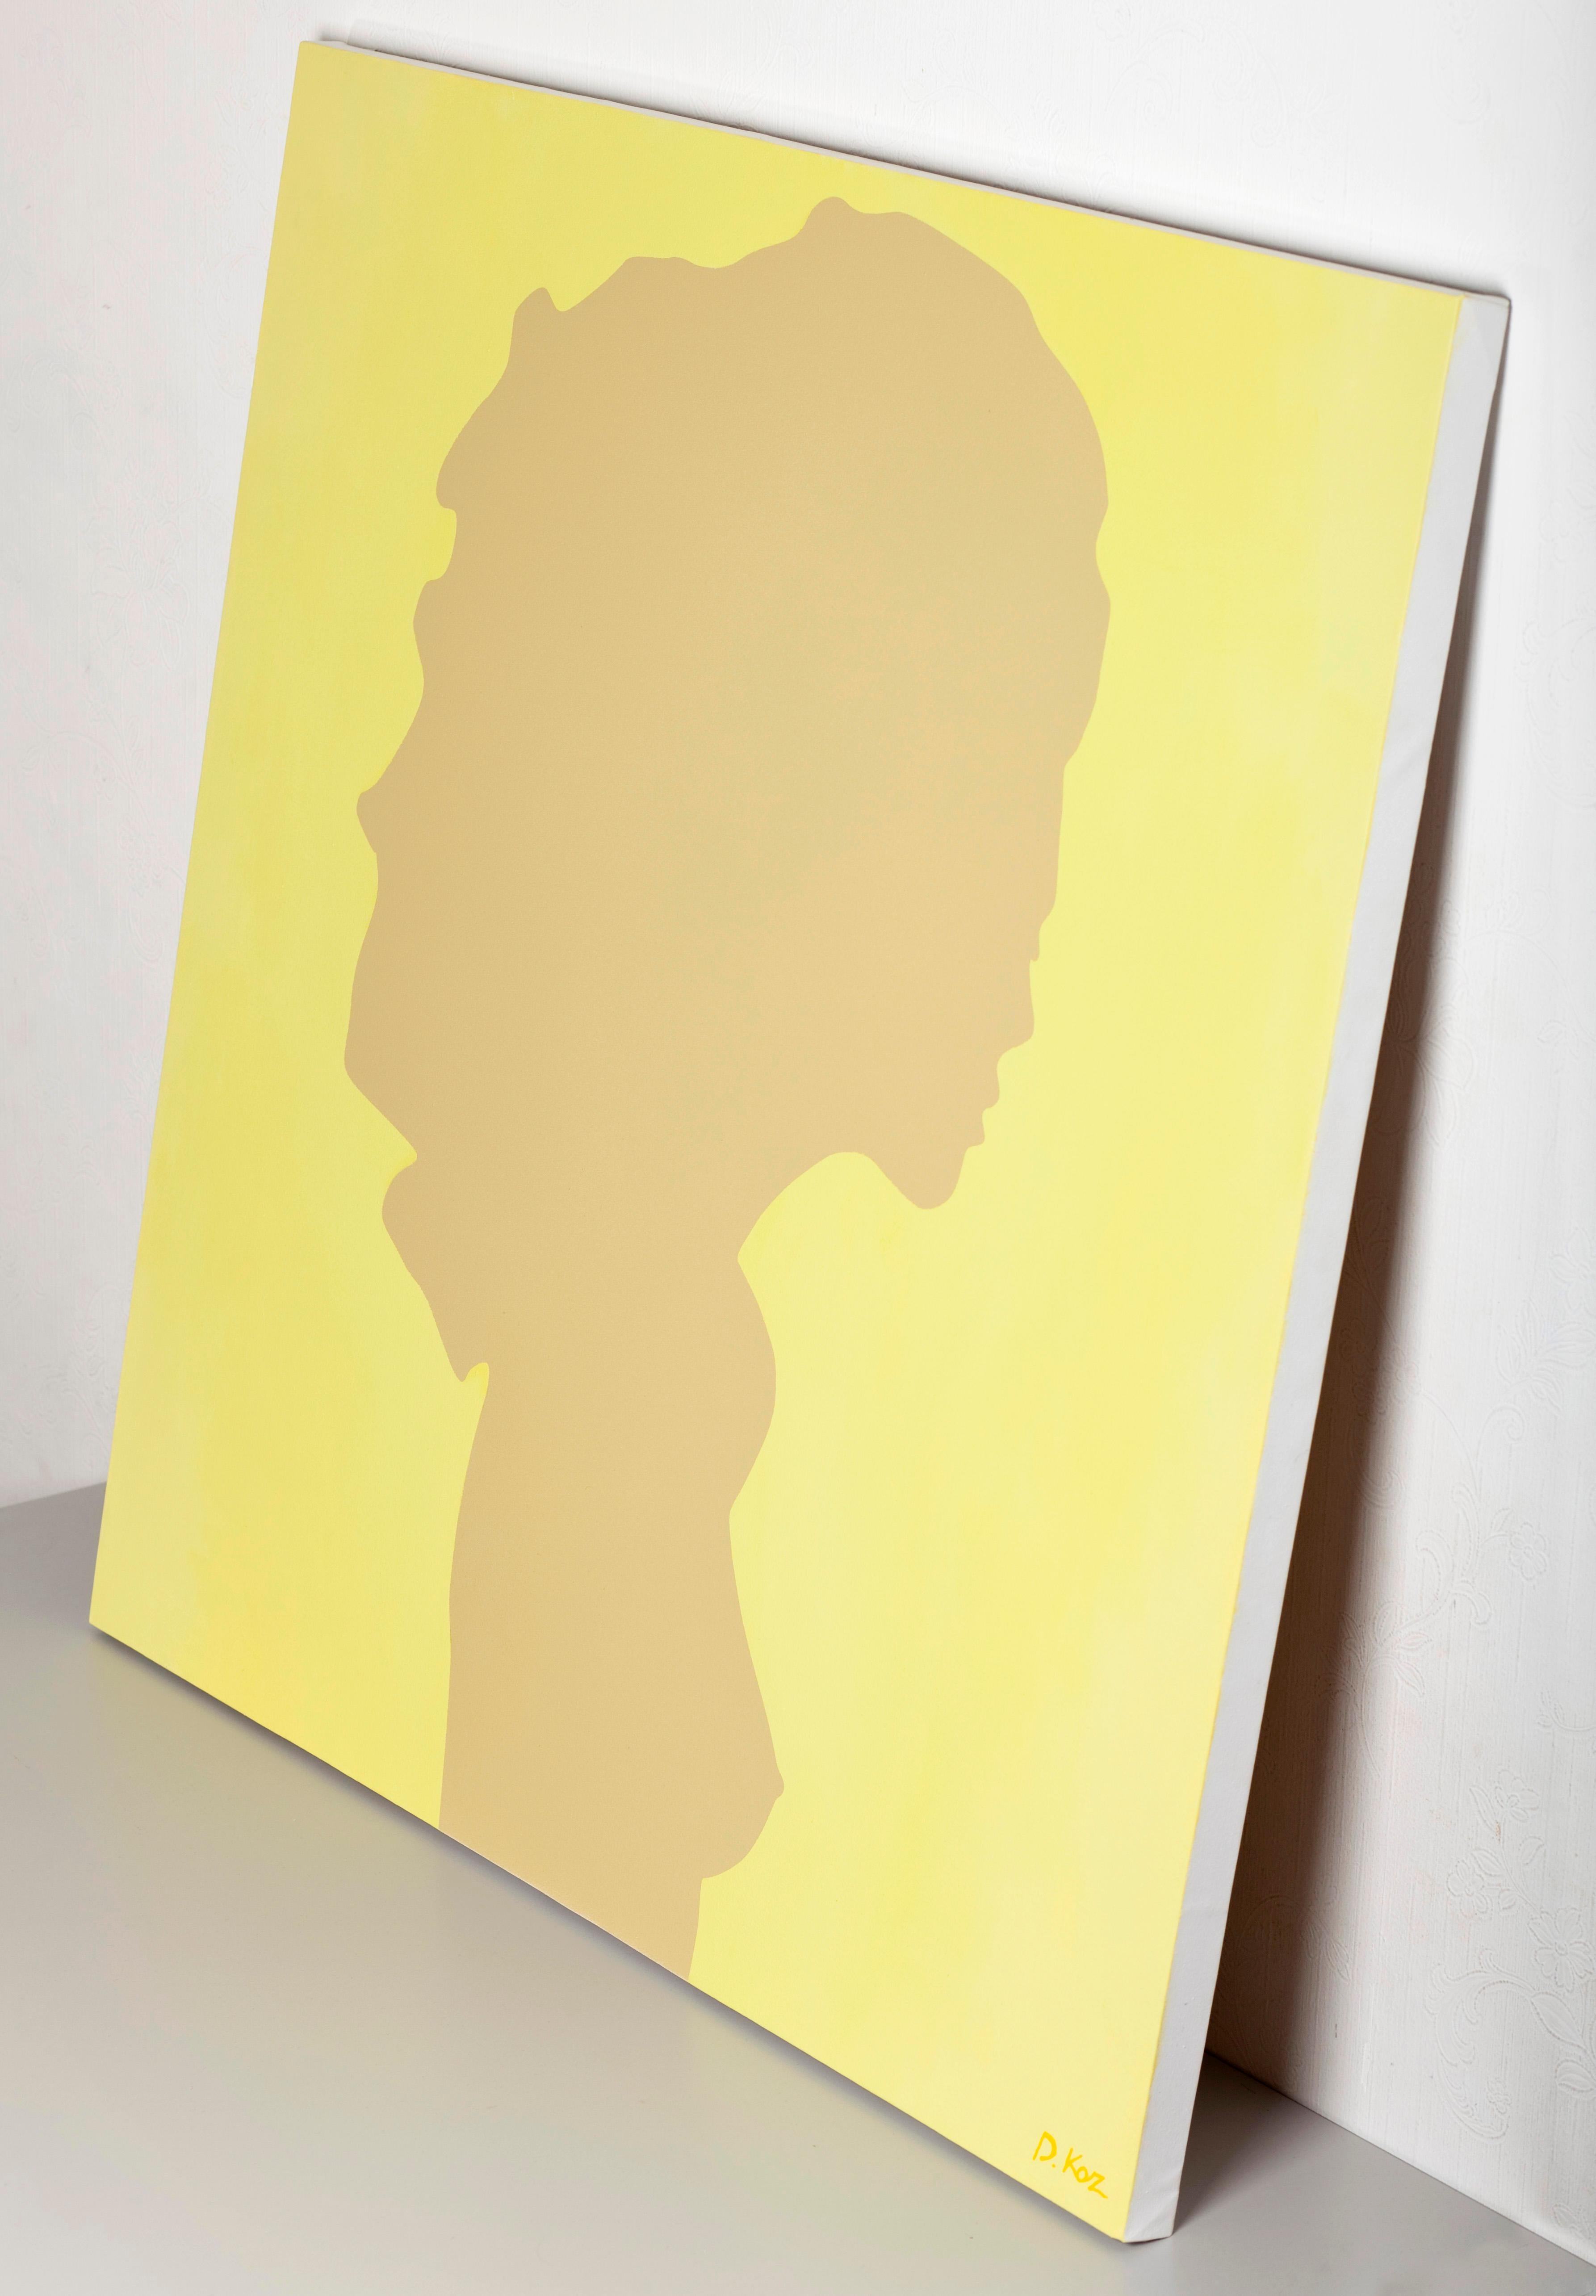 Shadow of a young girl - Pop Painting, Acrylic on Canvas, Daniel Kozeletckiy For Sale 3